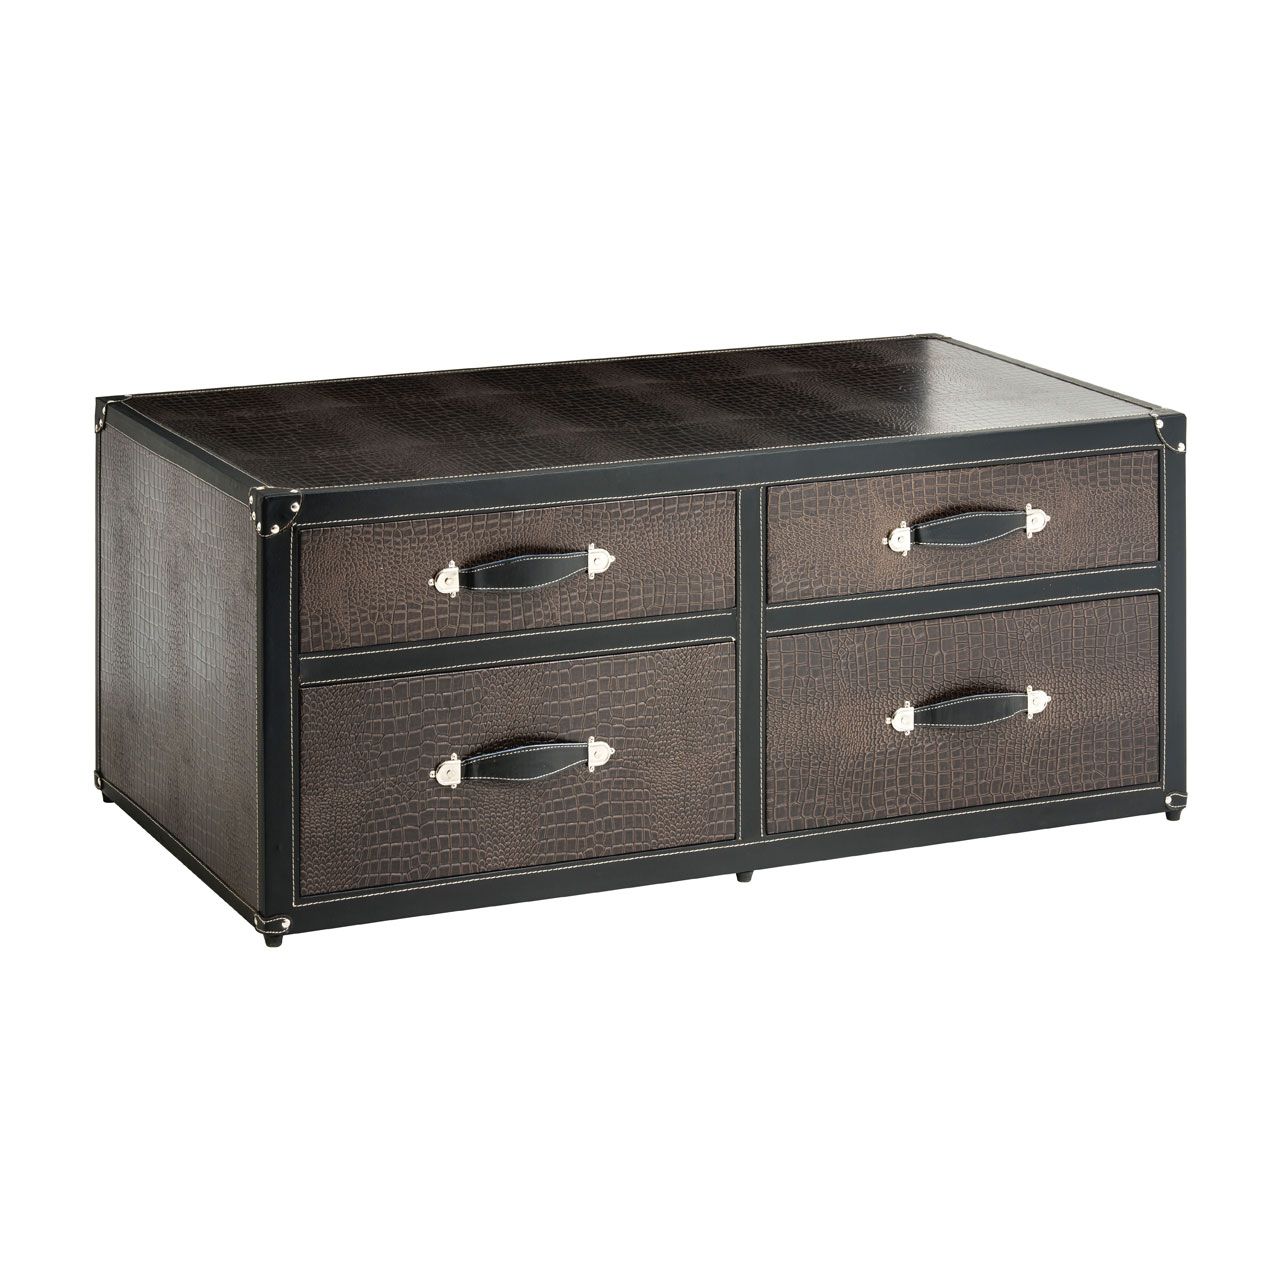 New Croc 4 Drawers Storage Trunk - LIVING ROOM, Trunks | Eclectic Niche